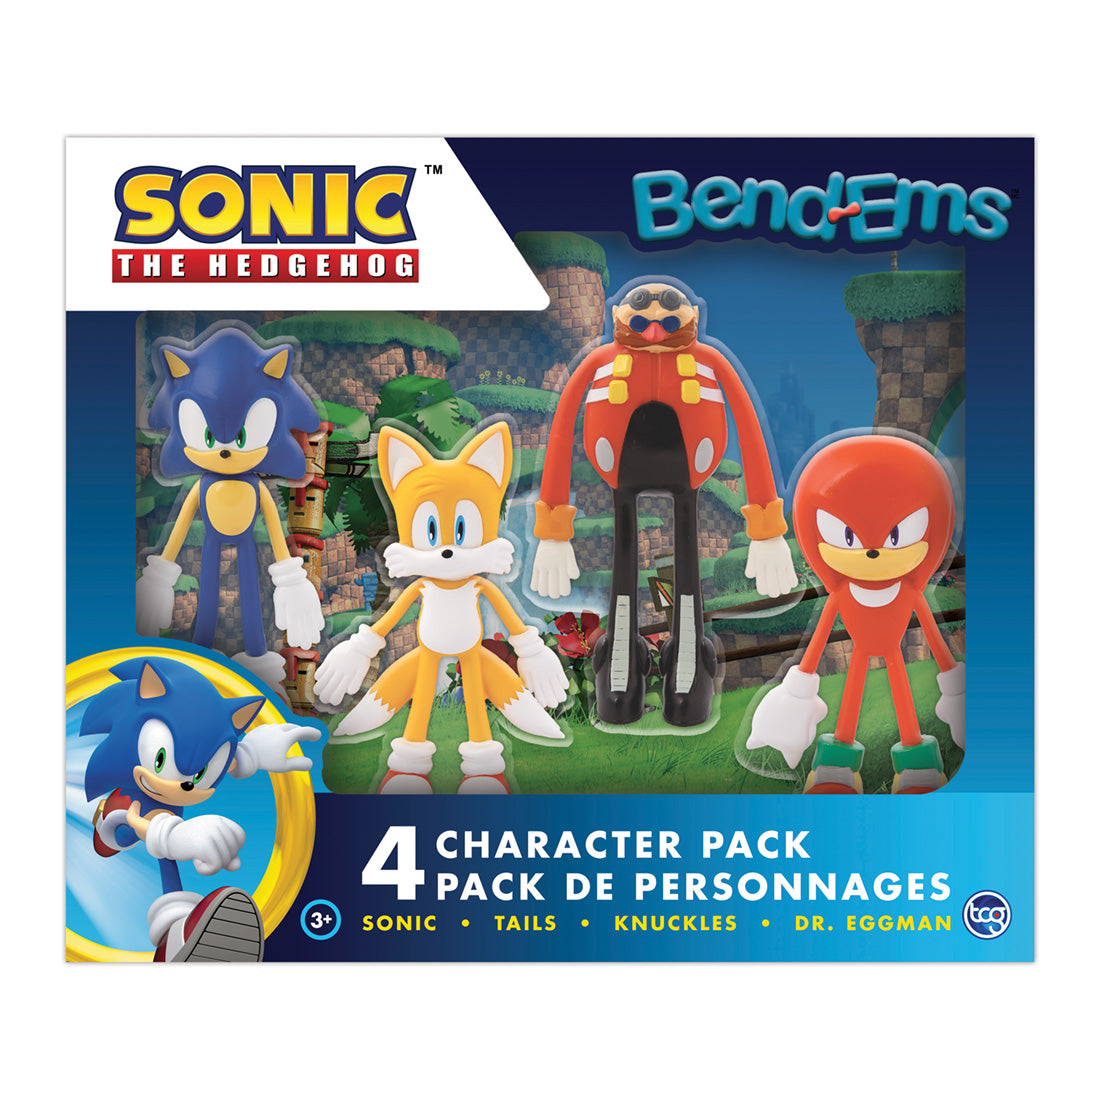 Bendems Sonic the Hedgehog 4 in 1 Pack